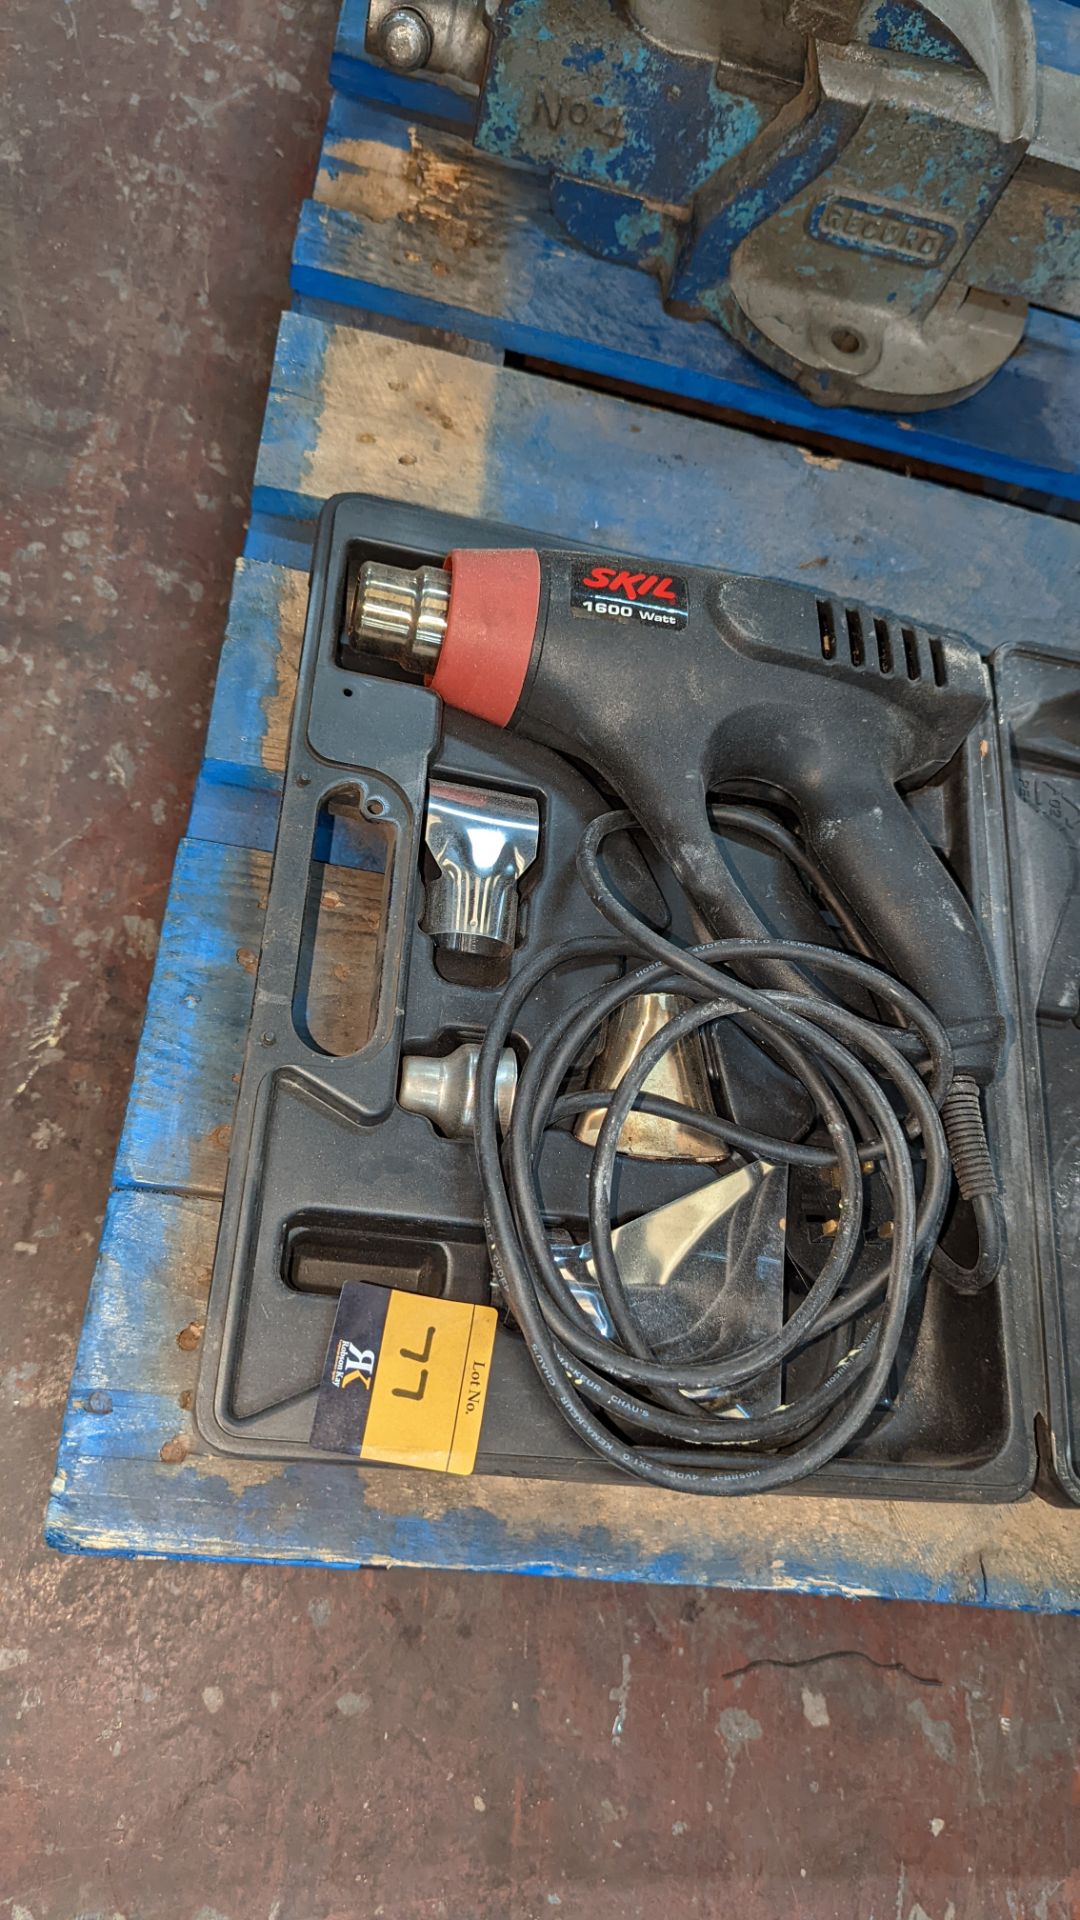 Skill heat gun in case with ancillaries, 1600w - Image 3 of 6